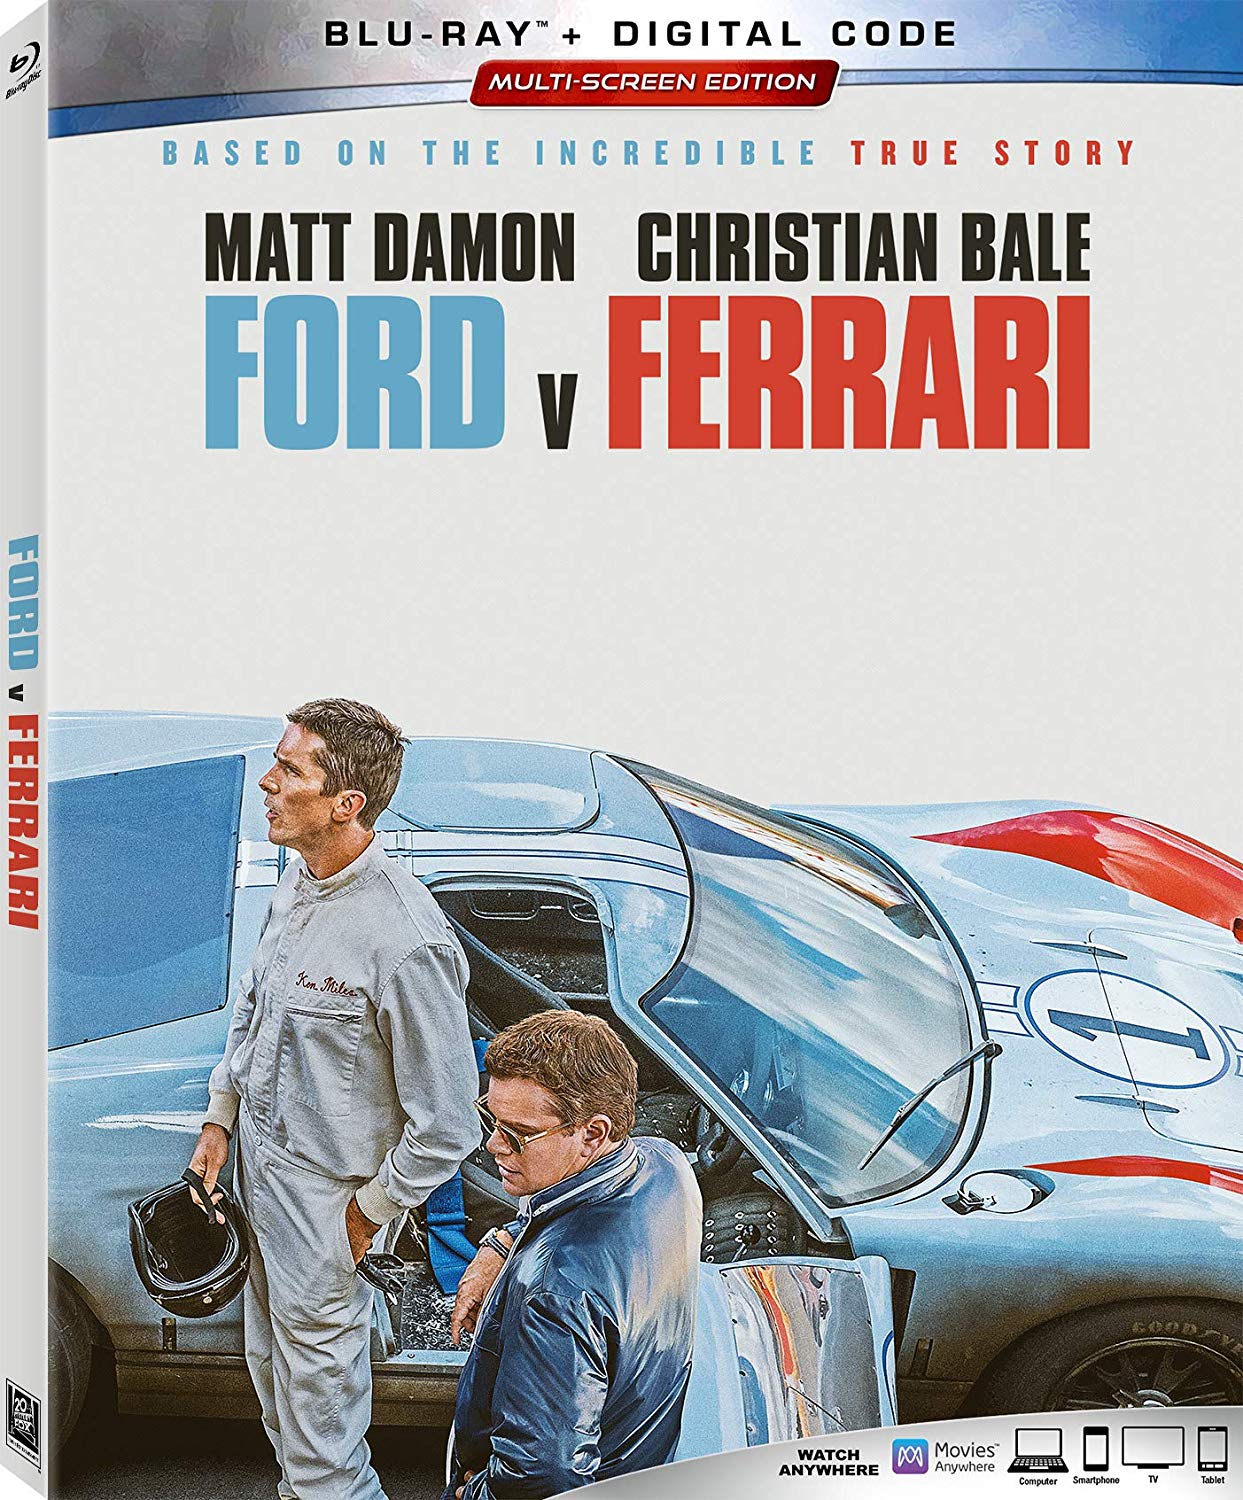 Ford v Ferrari now available on Blu-ray